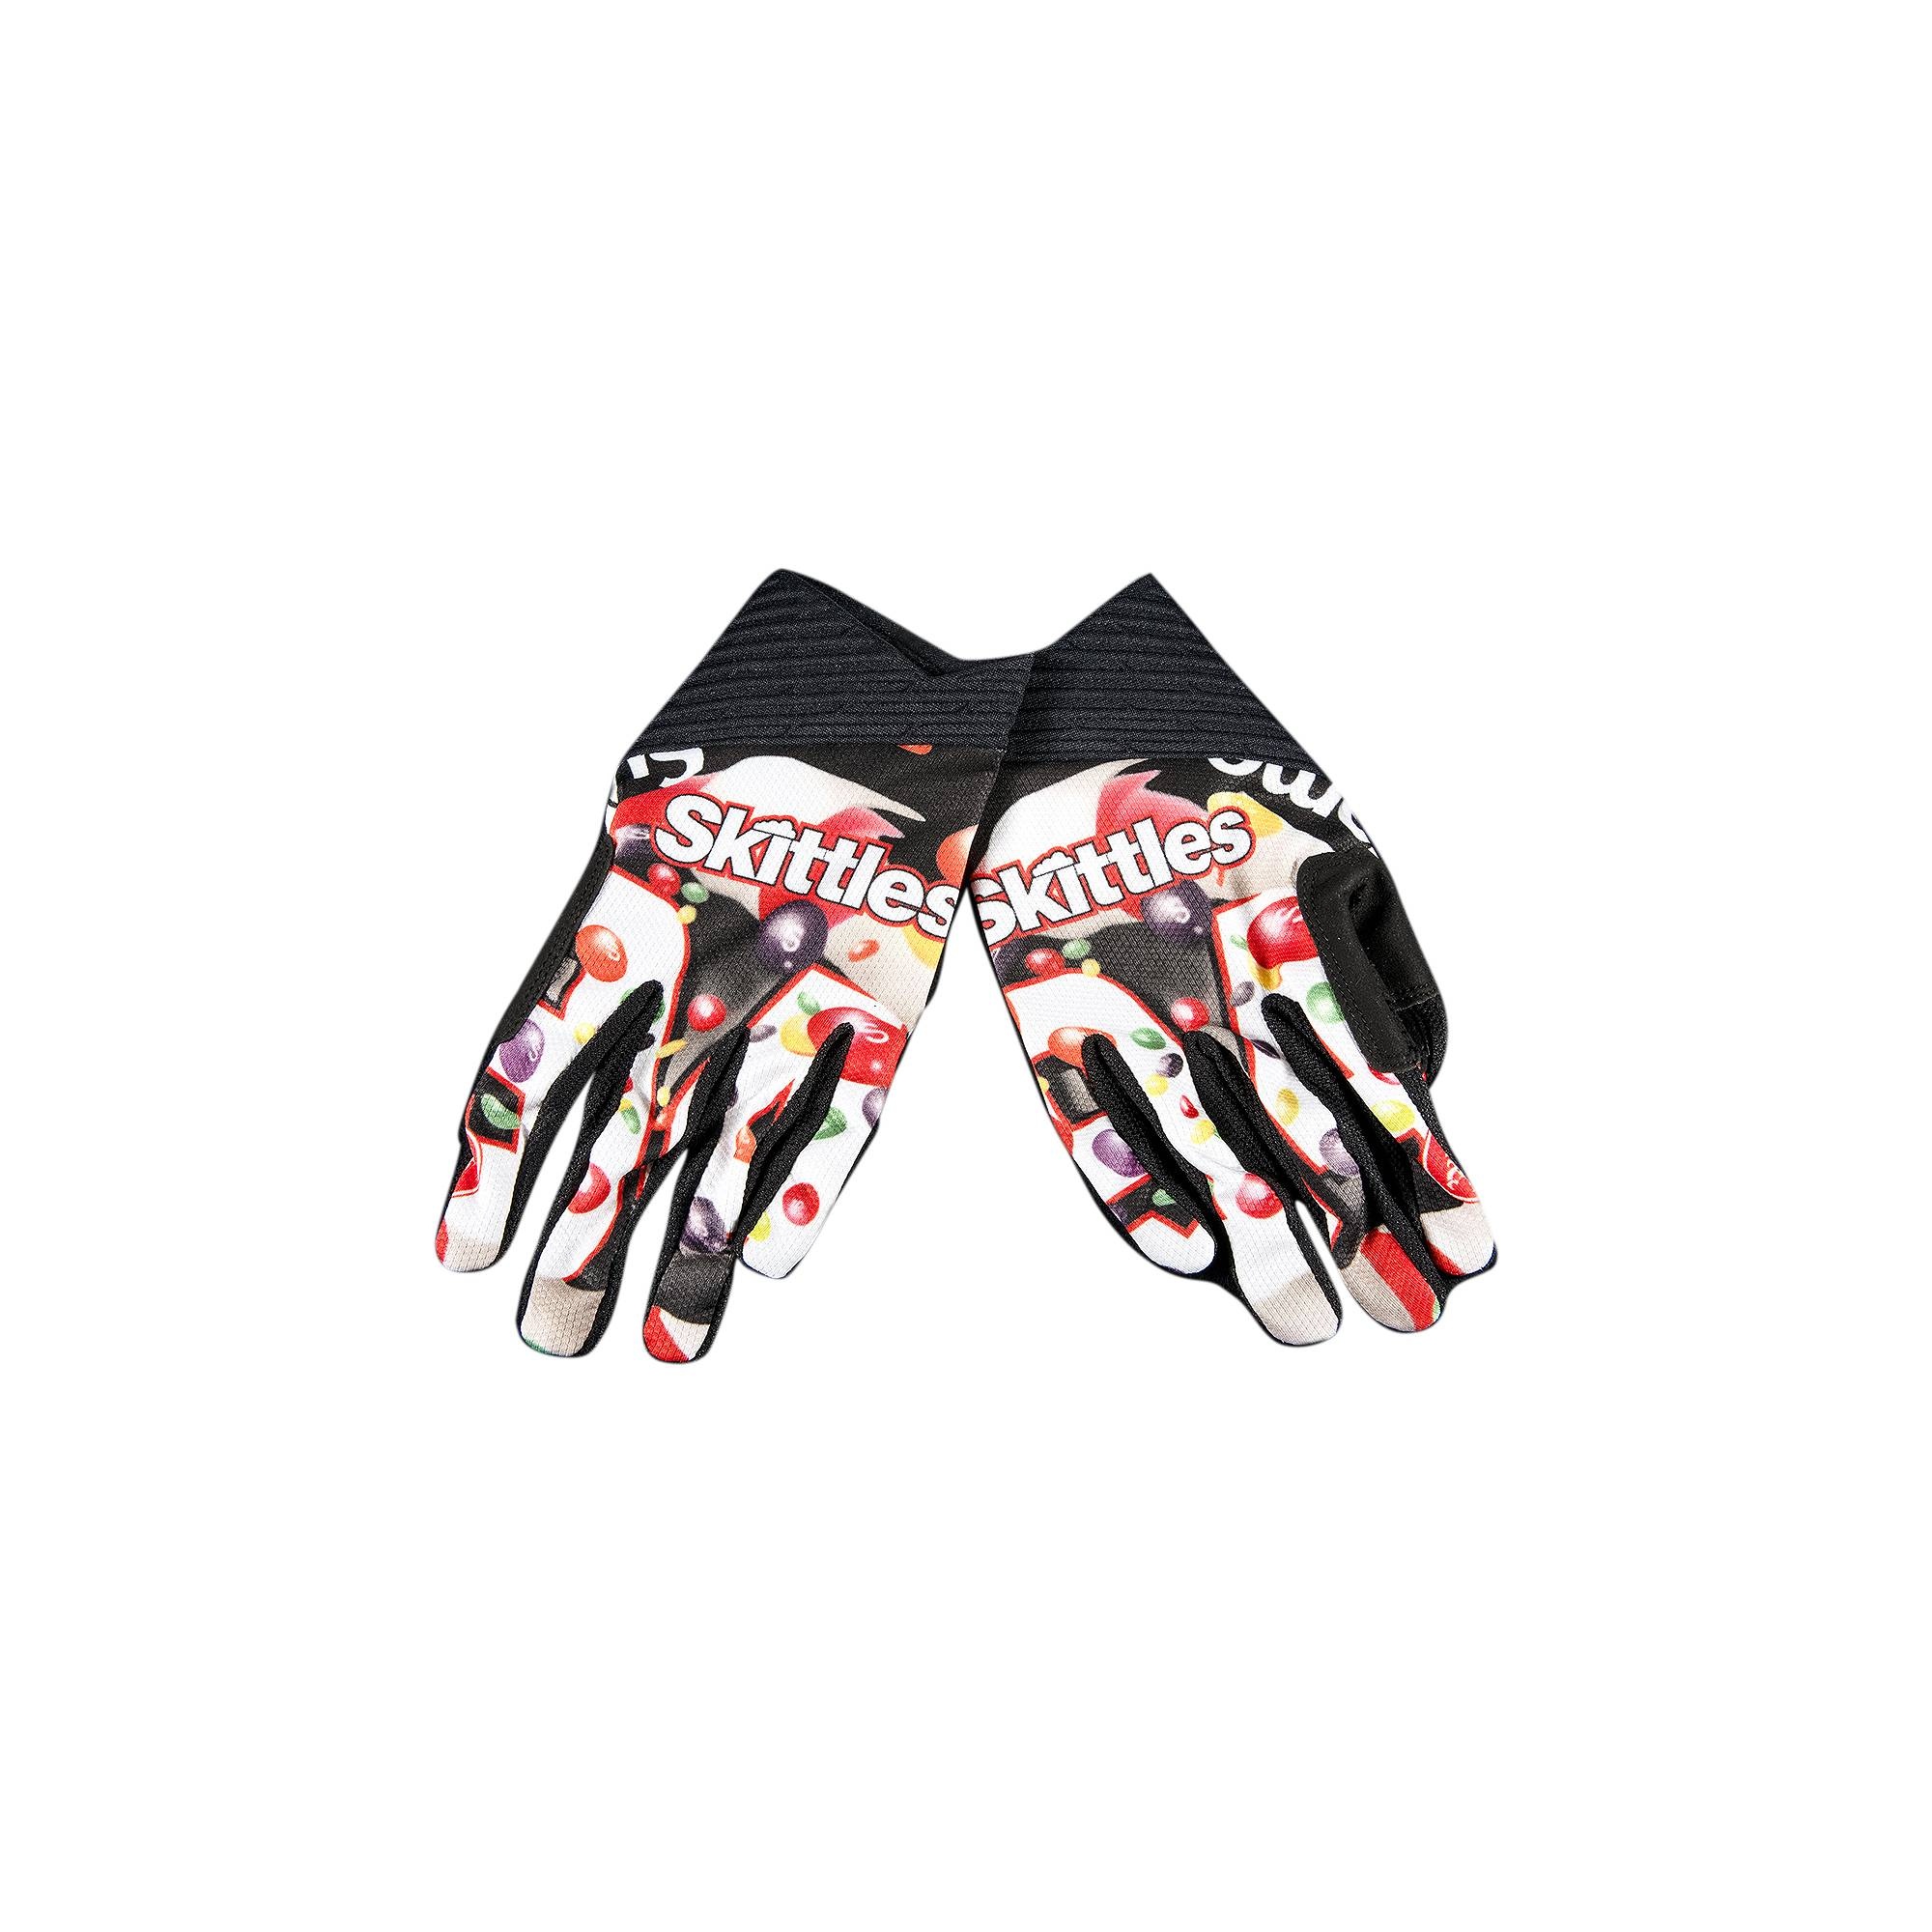 Supreme x Skittles x Castell Cycling Gloves 'White' - 1